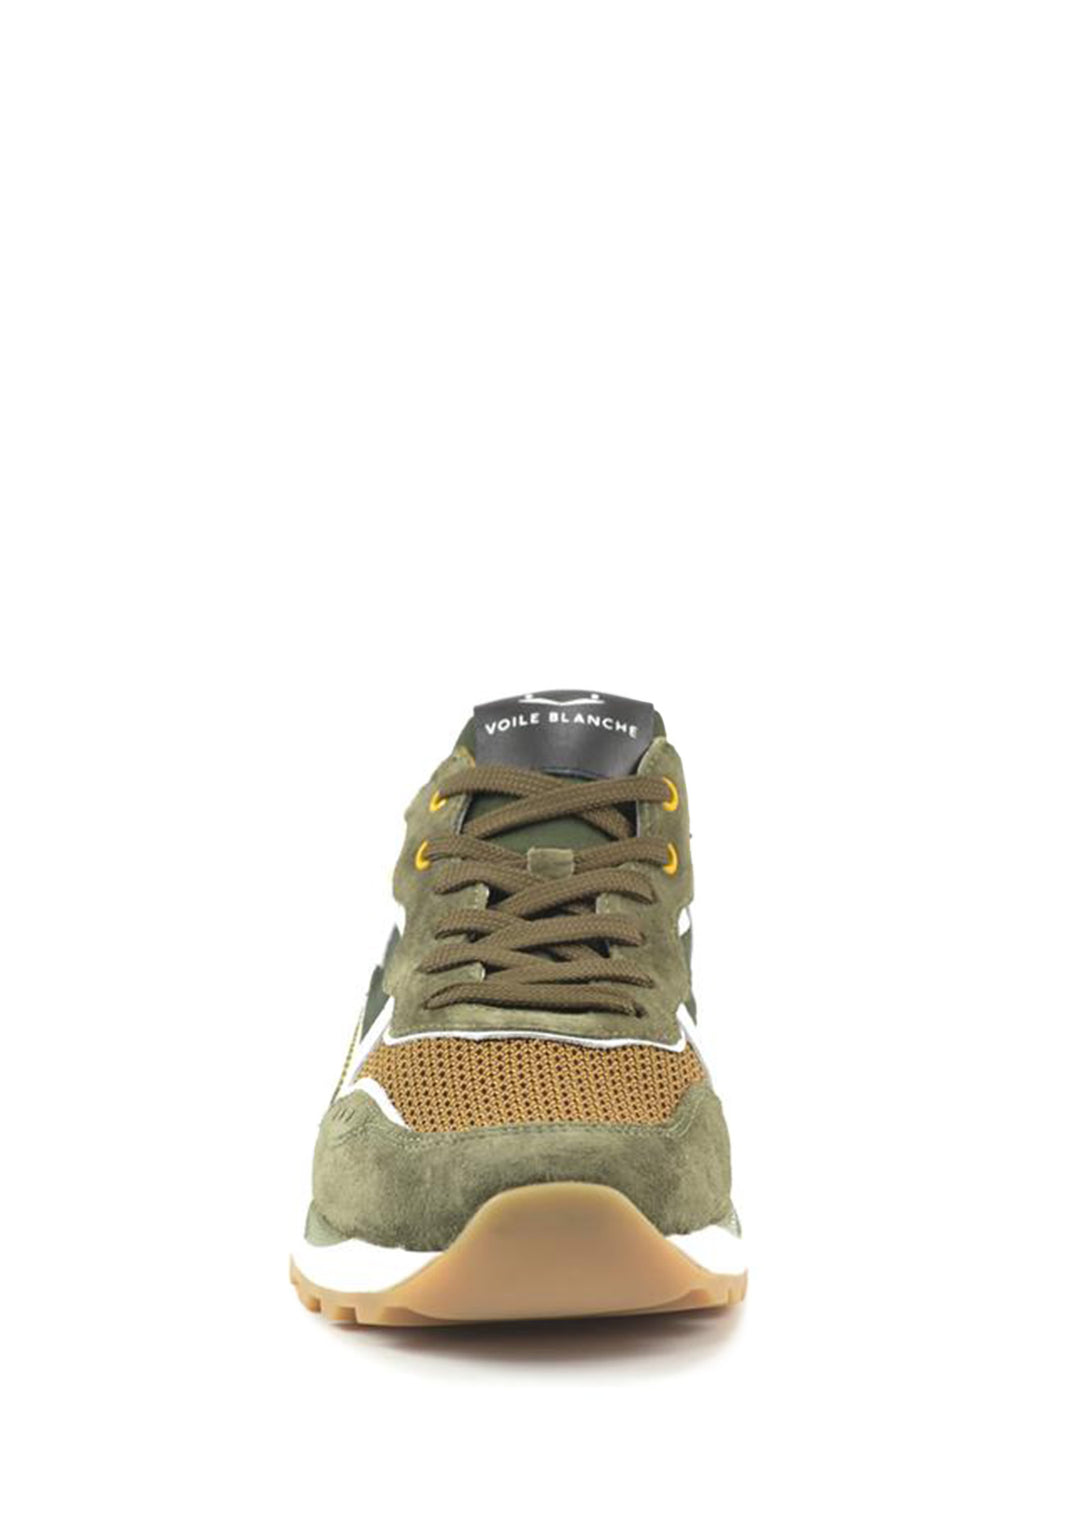 SNEAKERS UOMO Army Green/white Voile Blanche